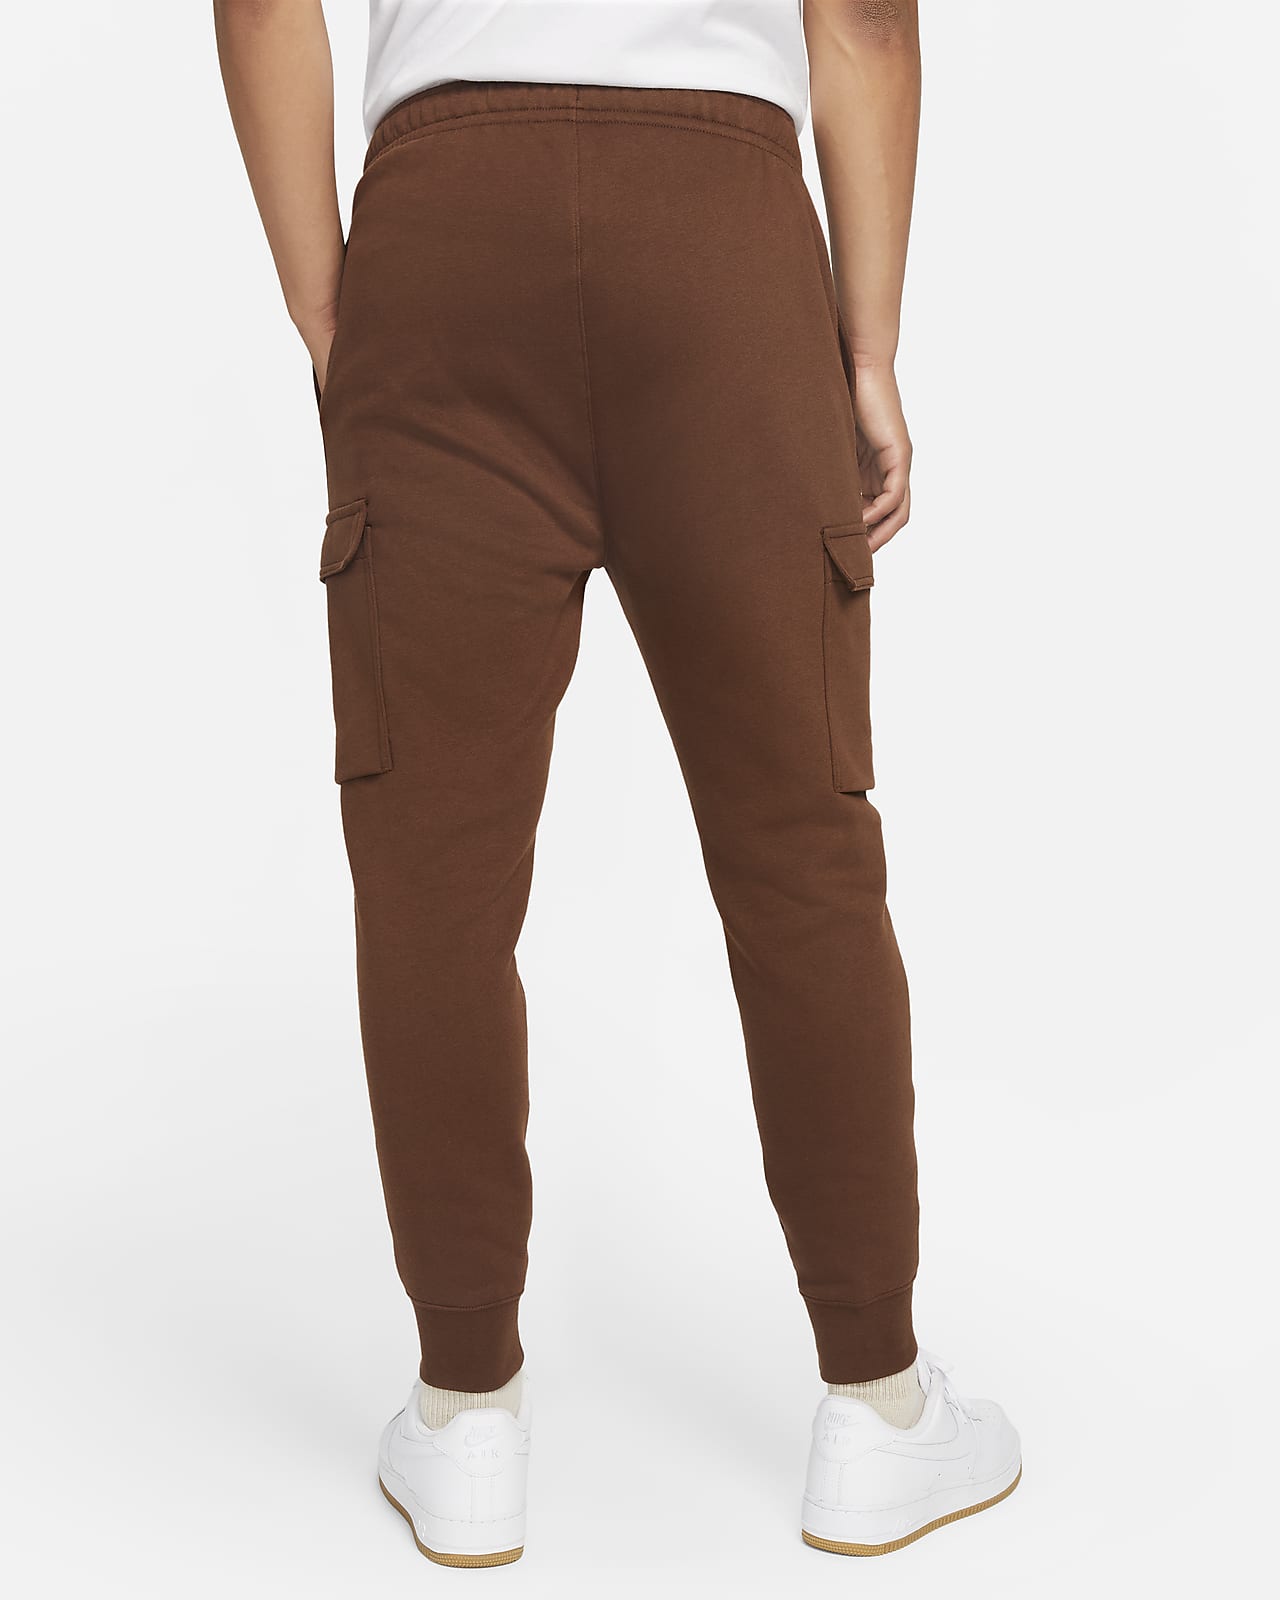 Buy Brown Four Pocket Cargo Pants Pure Cotton for Best Price, Reviews, Free  Shipping